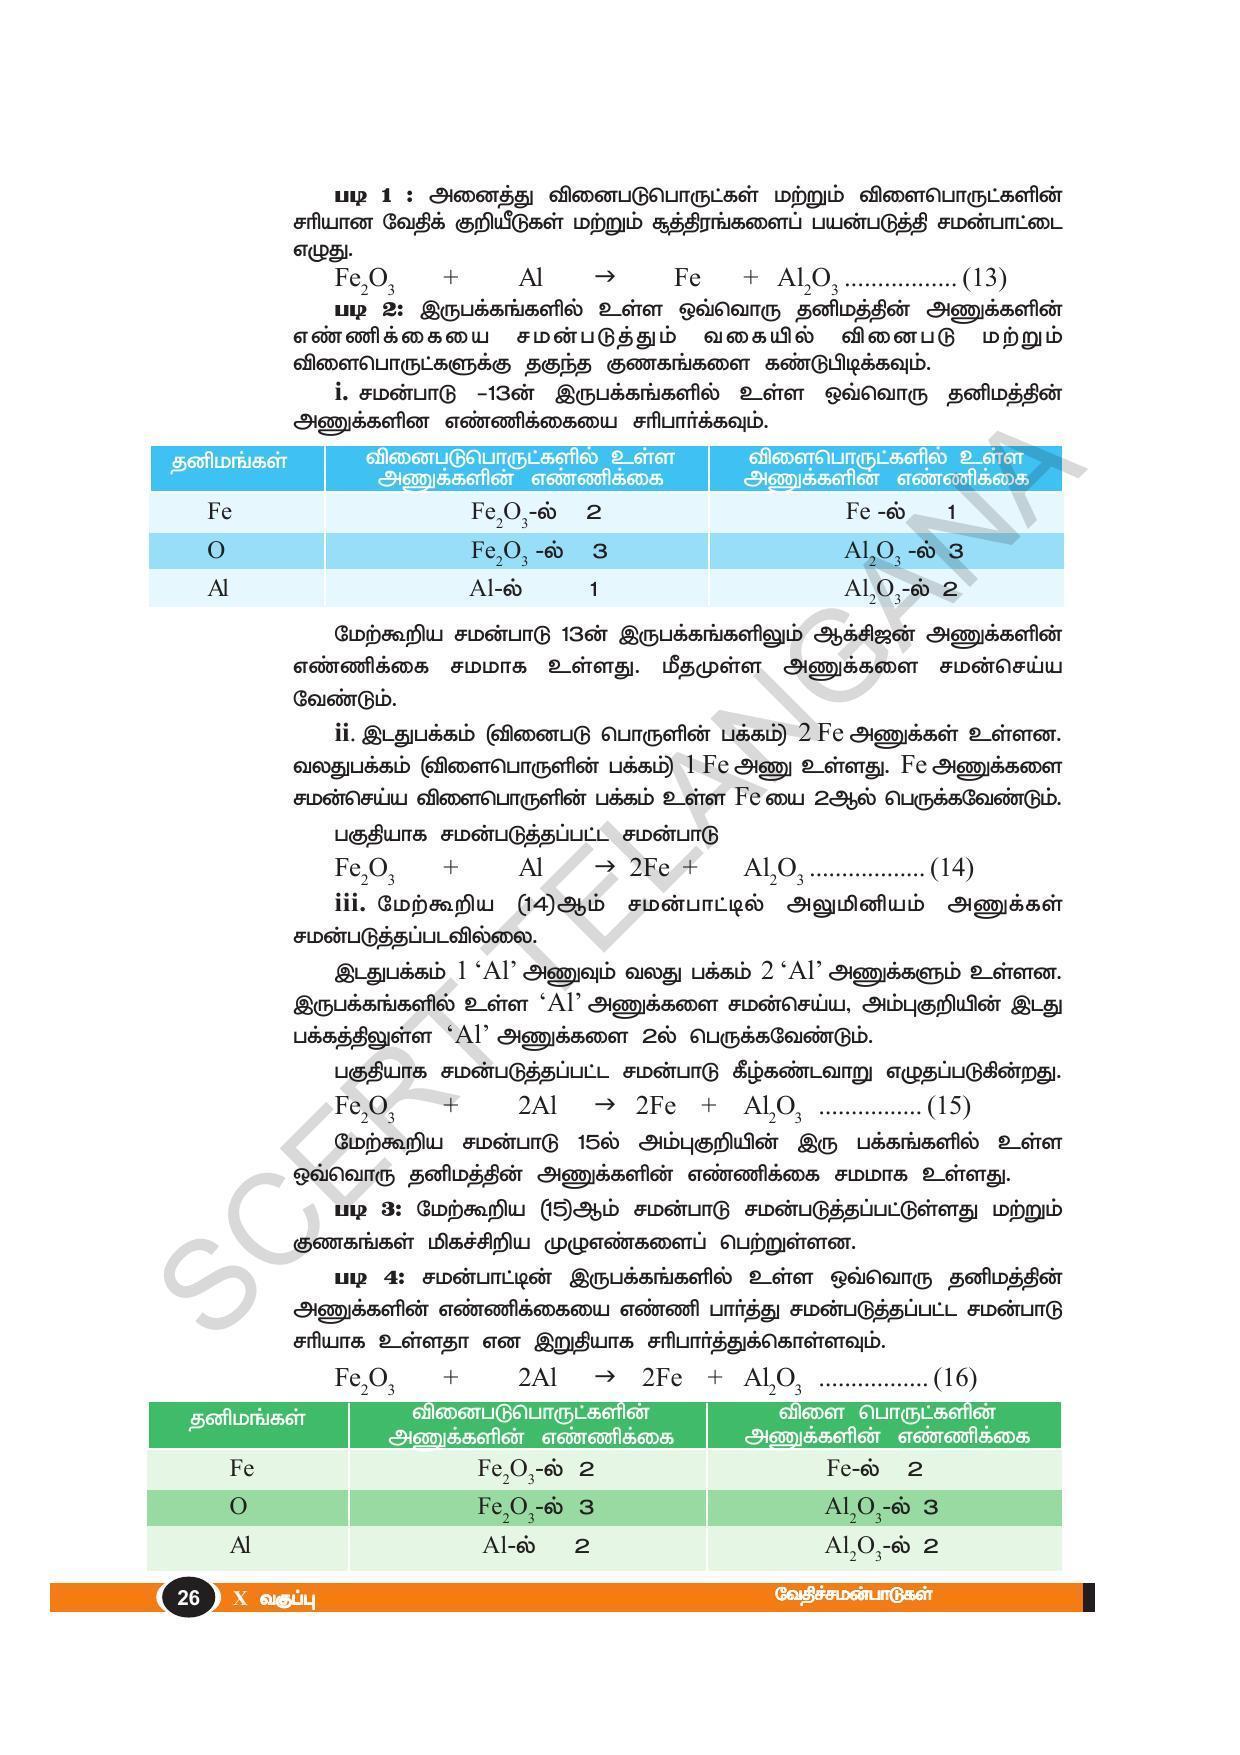 TS SCERT Class 10 Physical Science(Tamil Medium) Text Book - Page 38